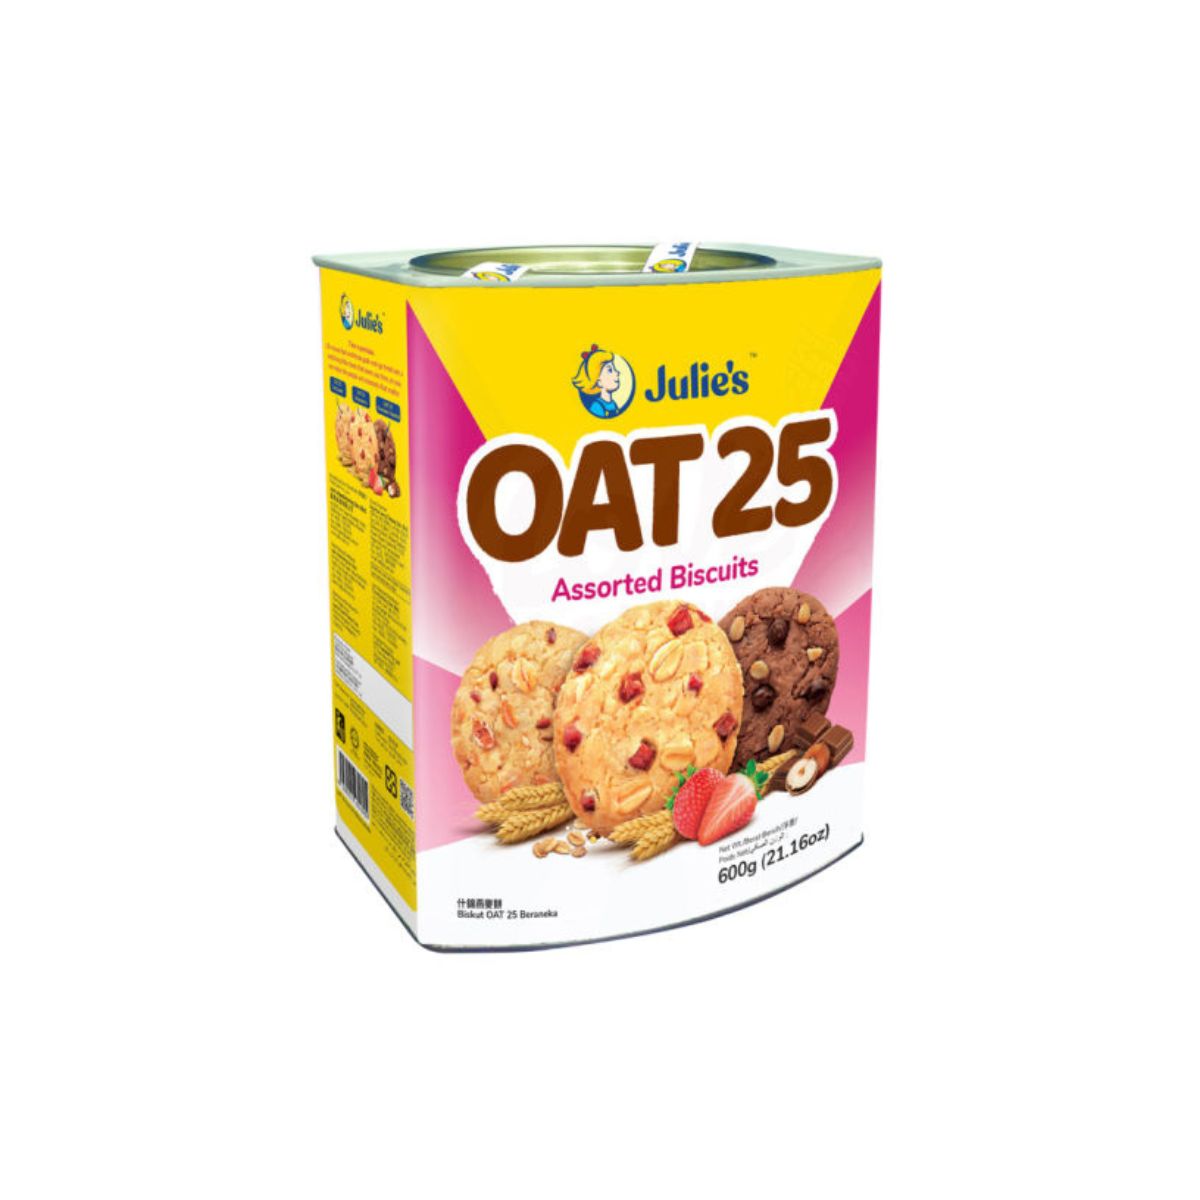 Julie's Oat 25 - Assorted Biscuits - Tin - 600g